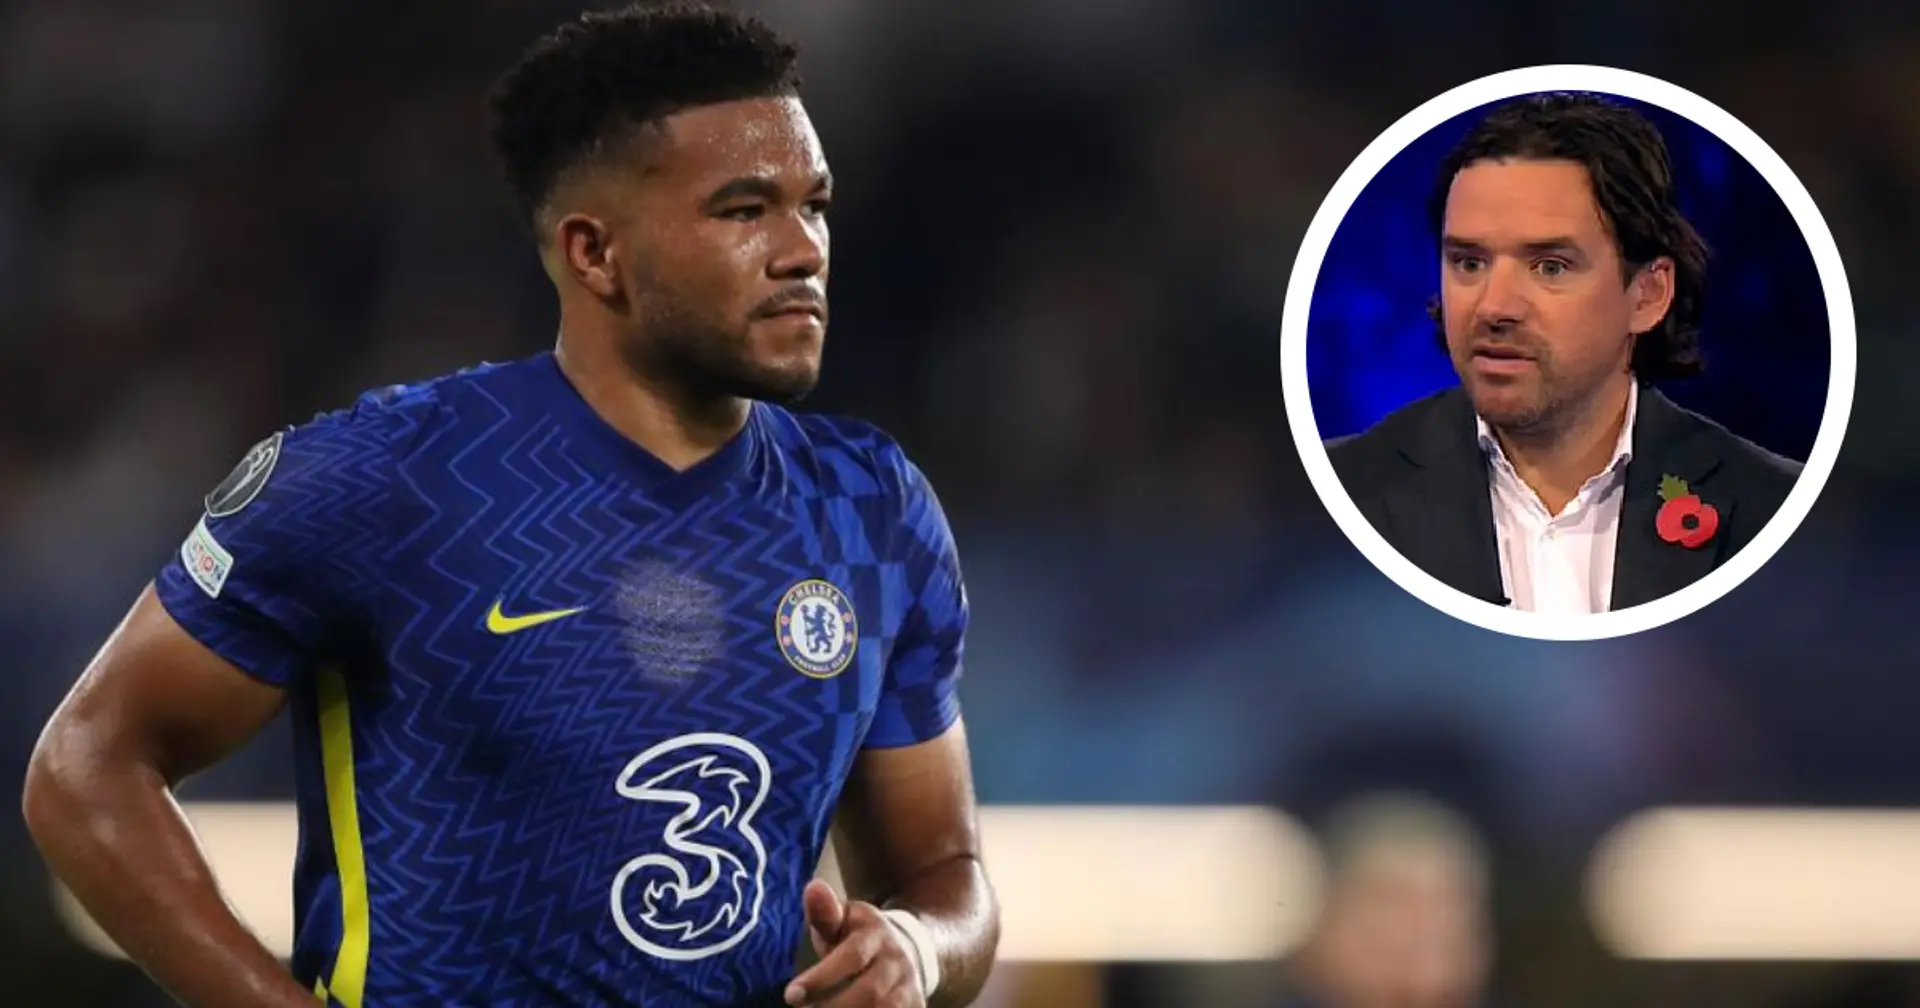 'He's like Michael with much better feet': Ex-United man Owen Hargreaves compares Reece James to brilliant former Chelsea midfielder